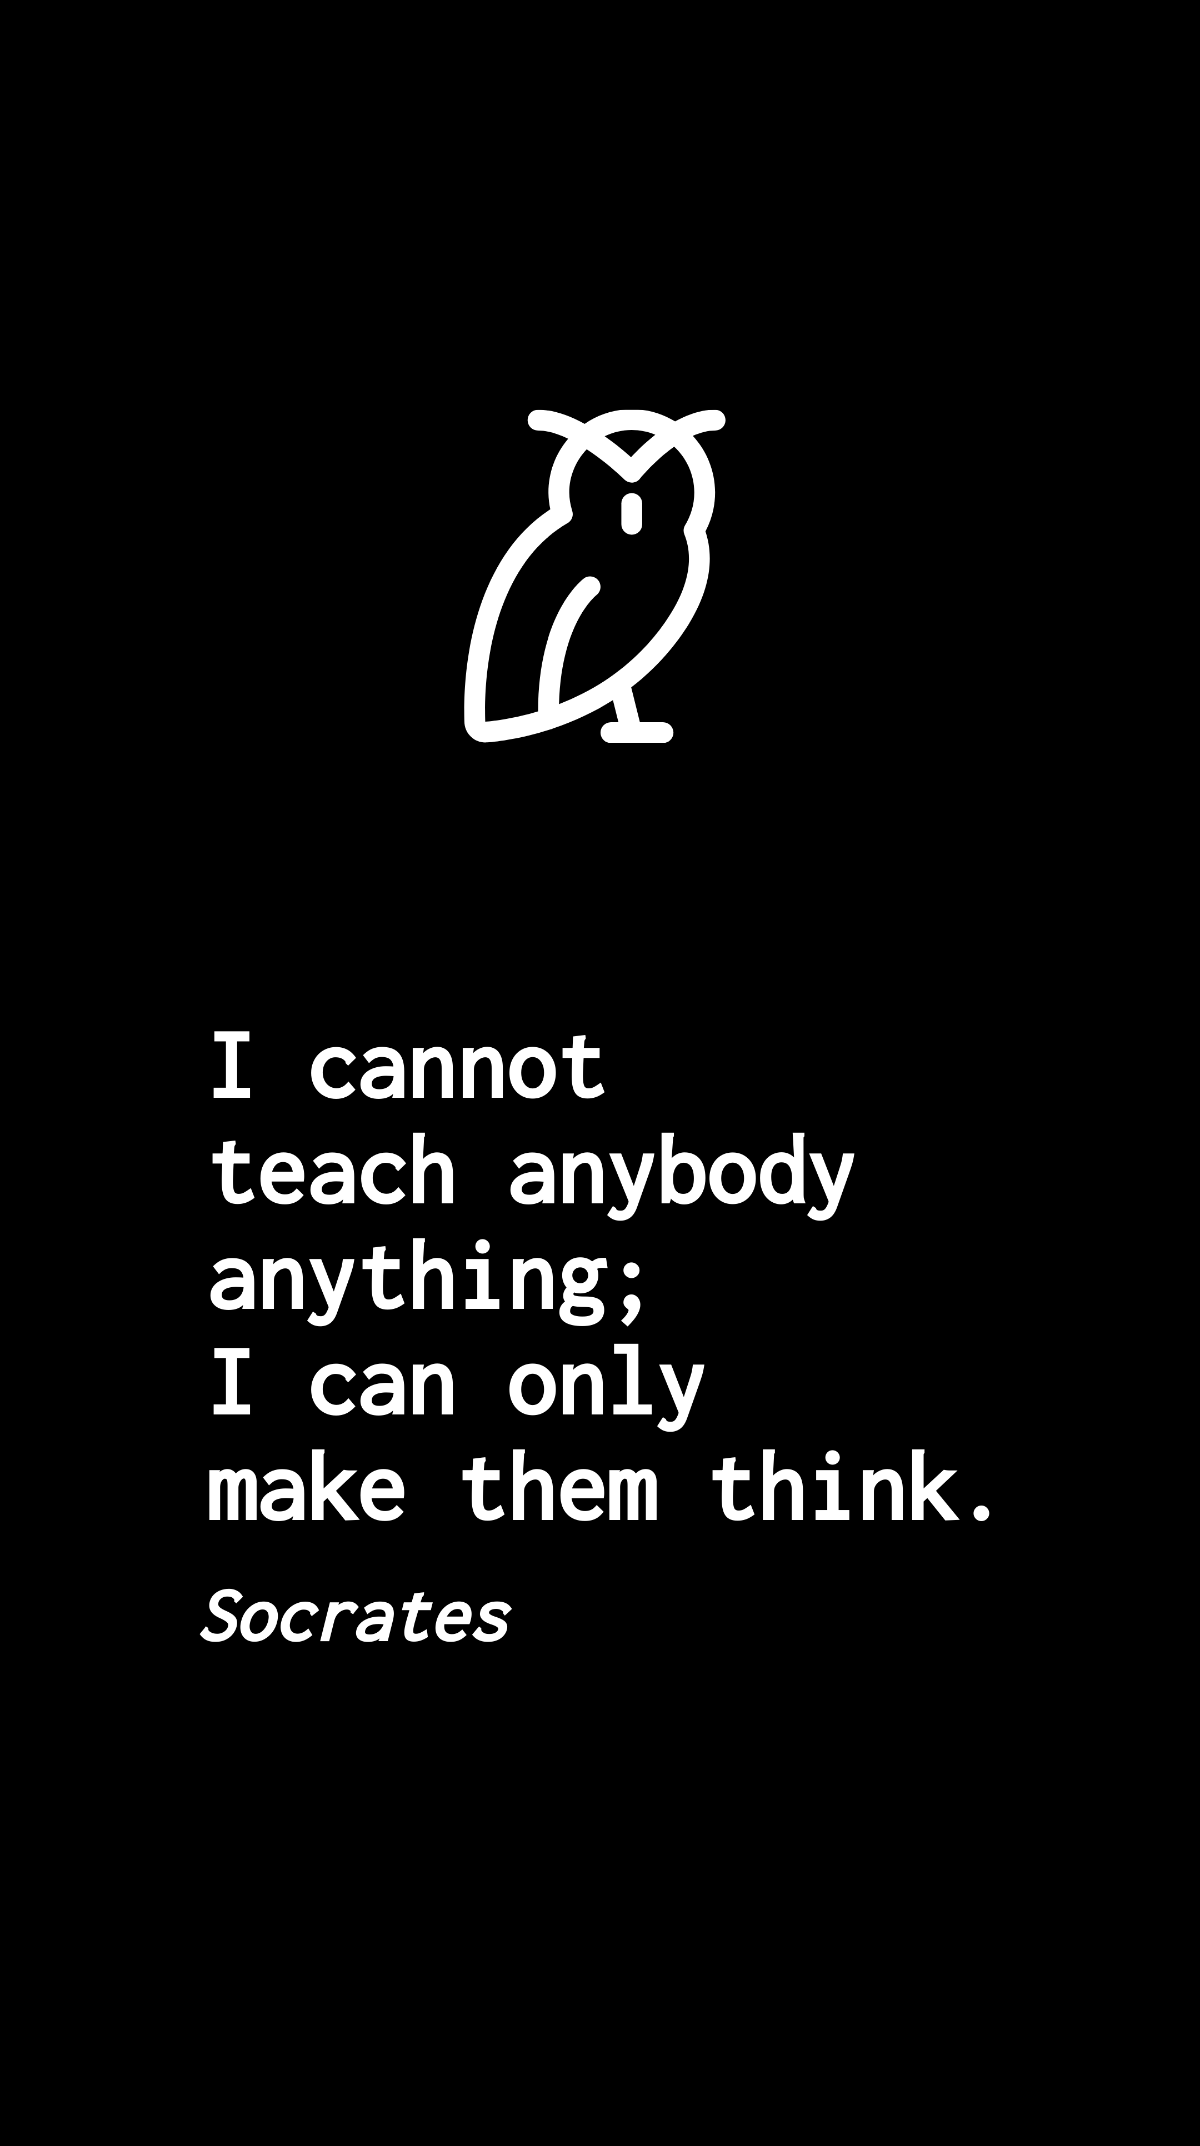 Free Socrates - I cannot teach anybody anything; I can only make them think. Template